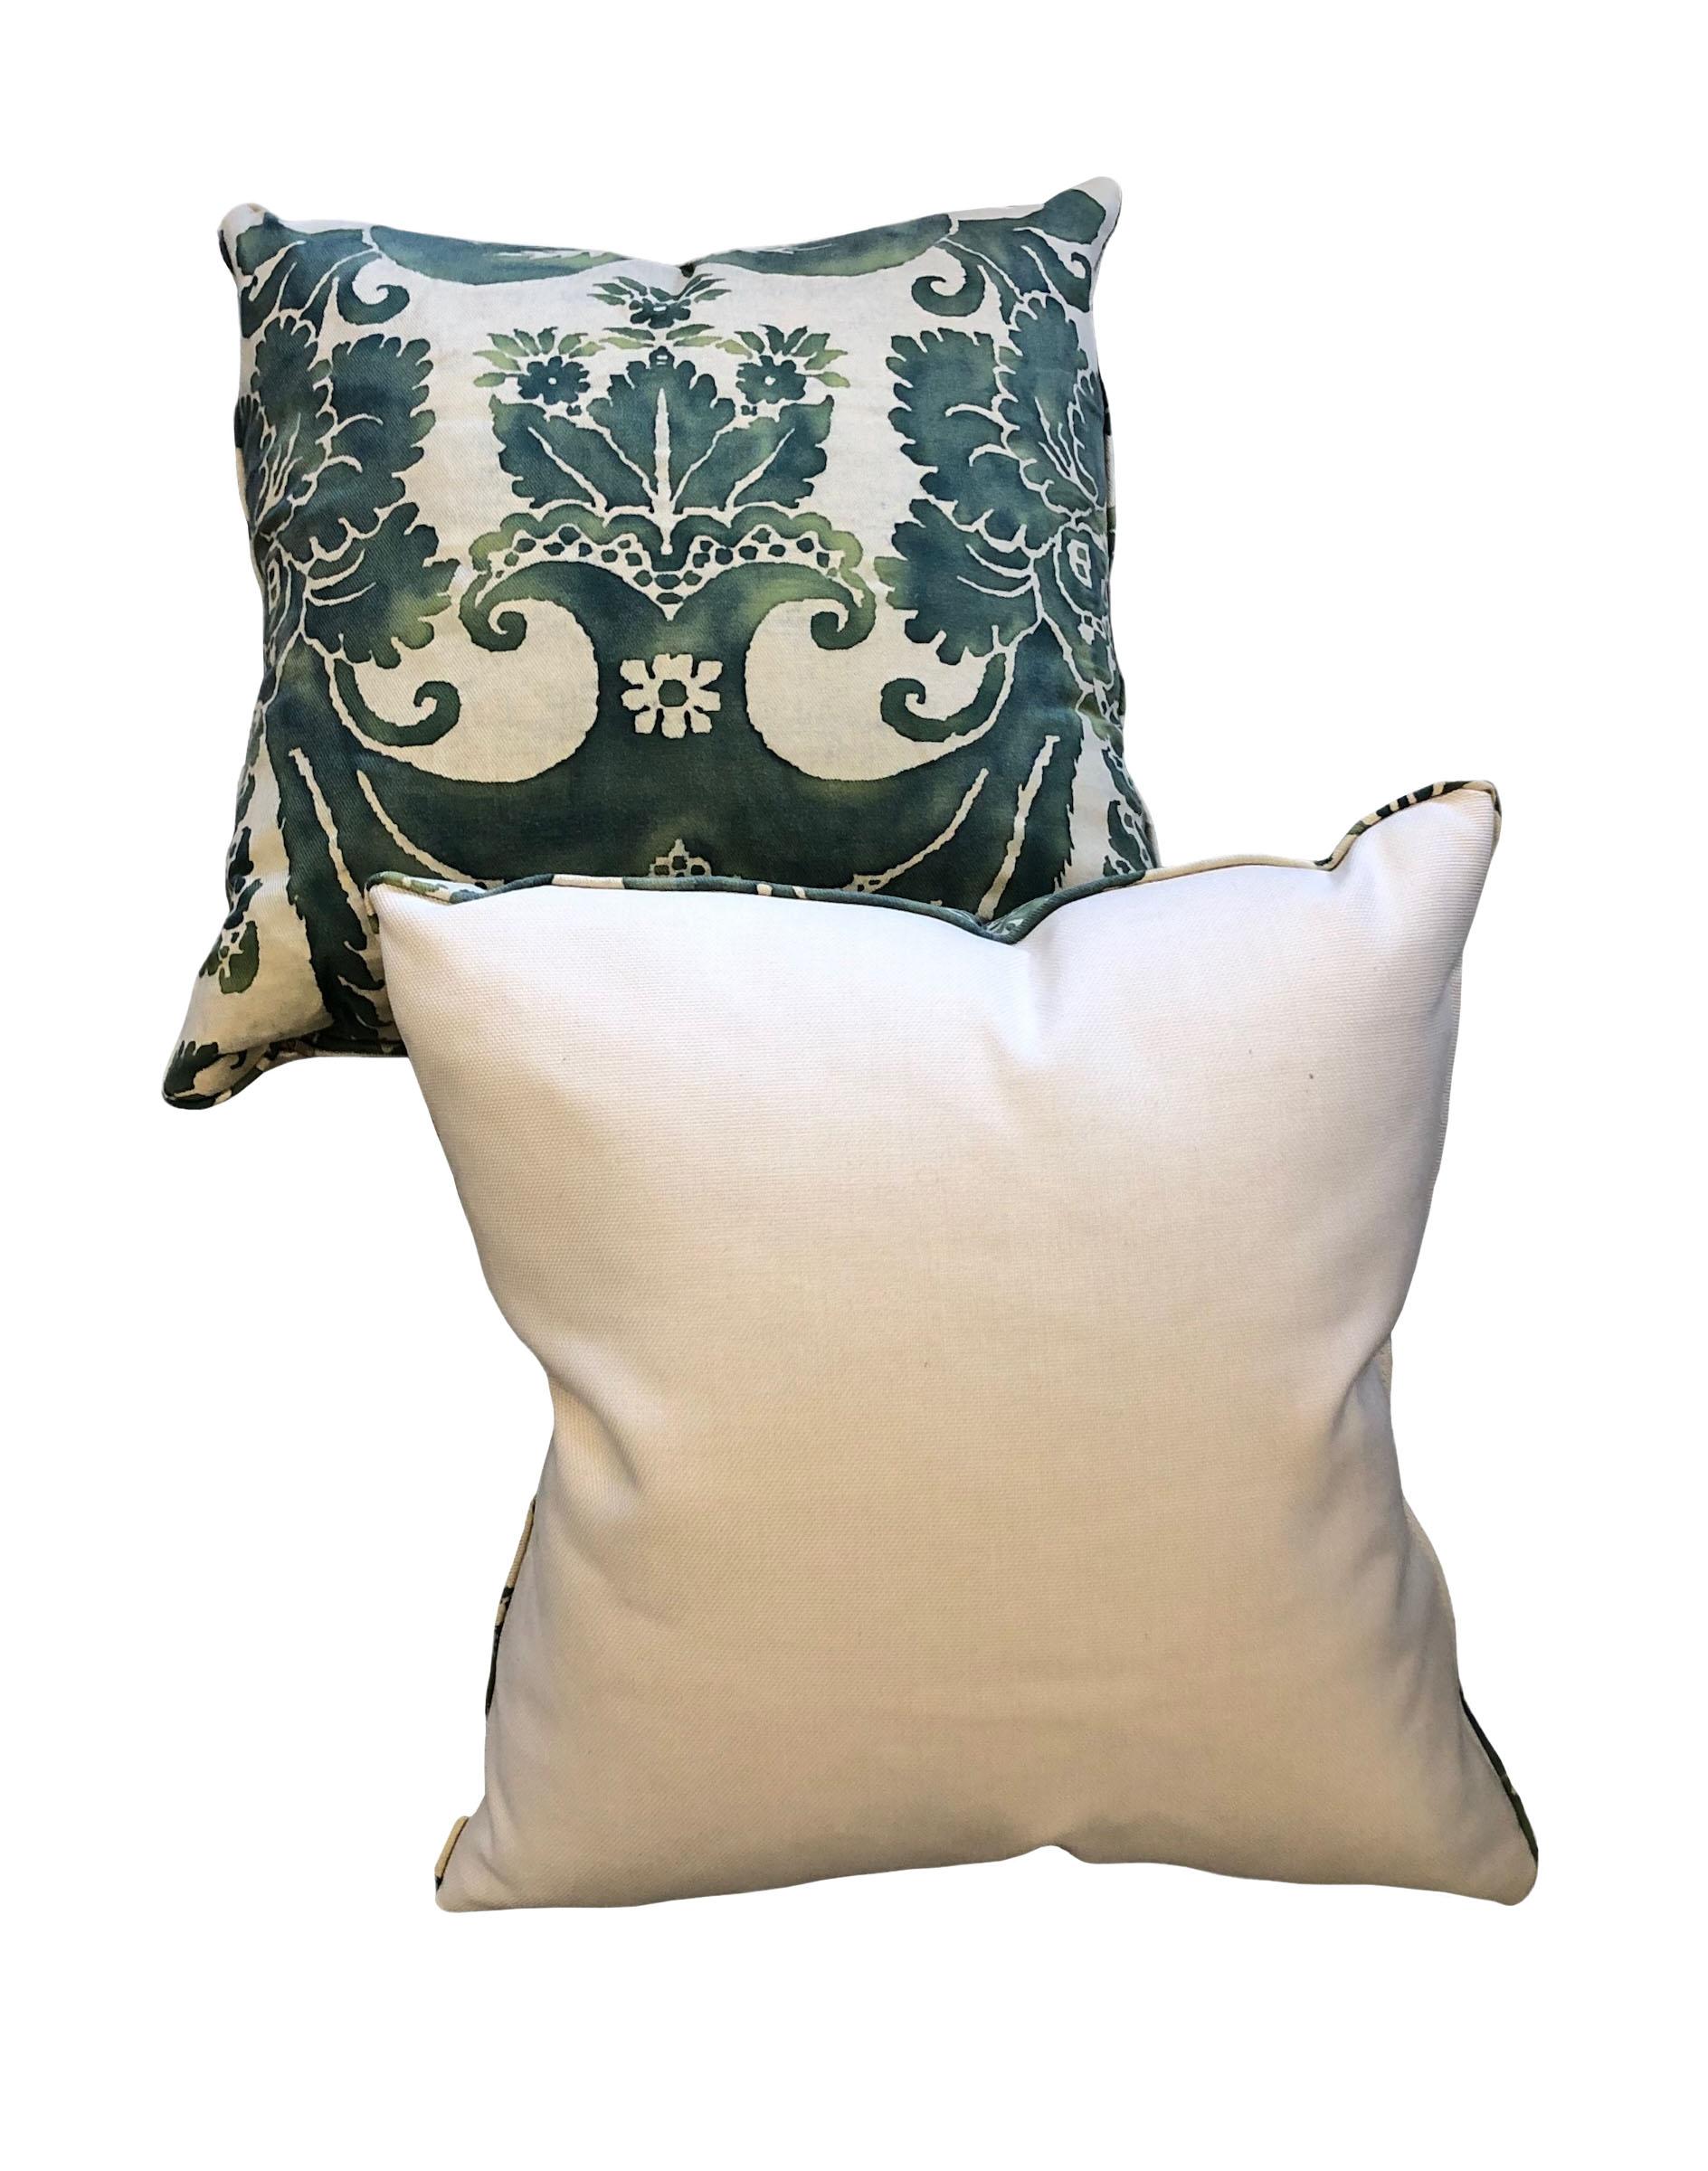 Mid-20th Century Italian Green Fortuny Pillows, a Pair For Sale